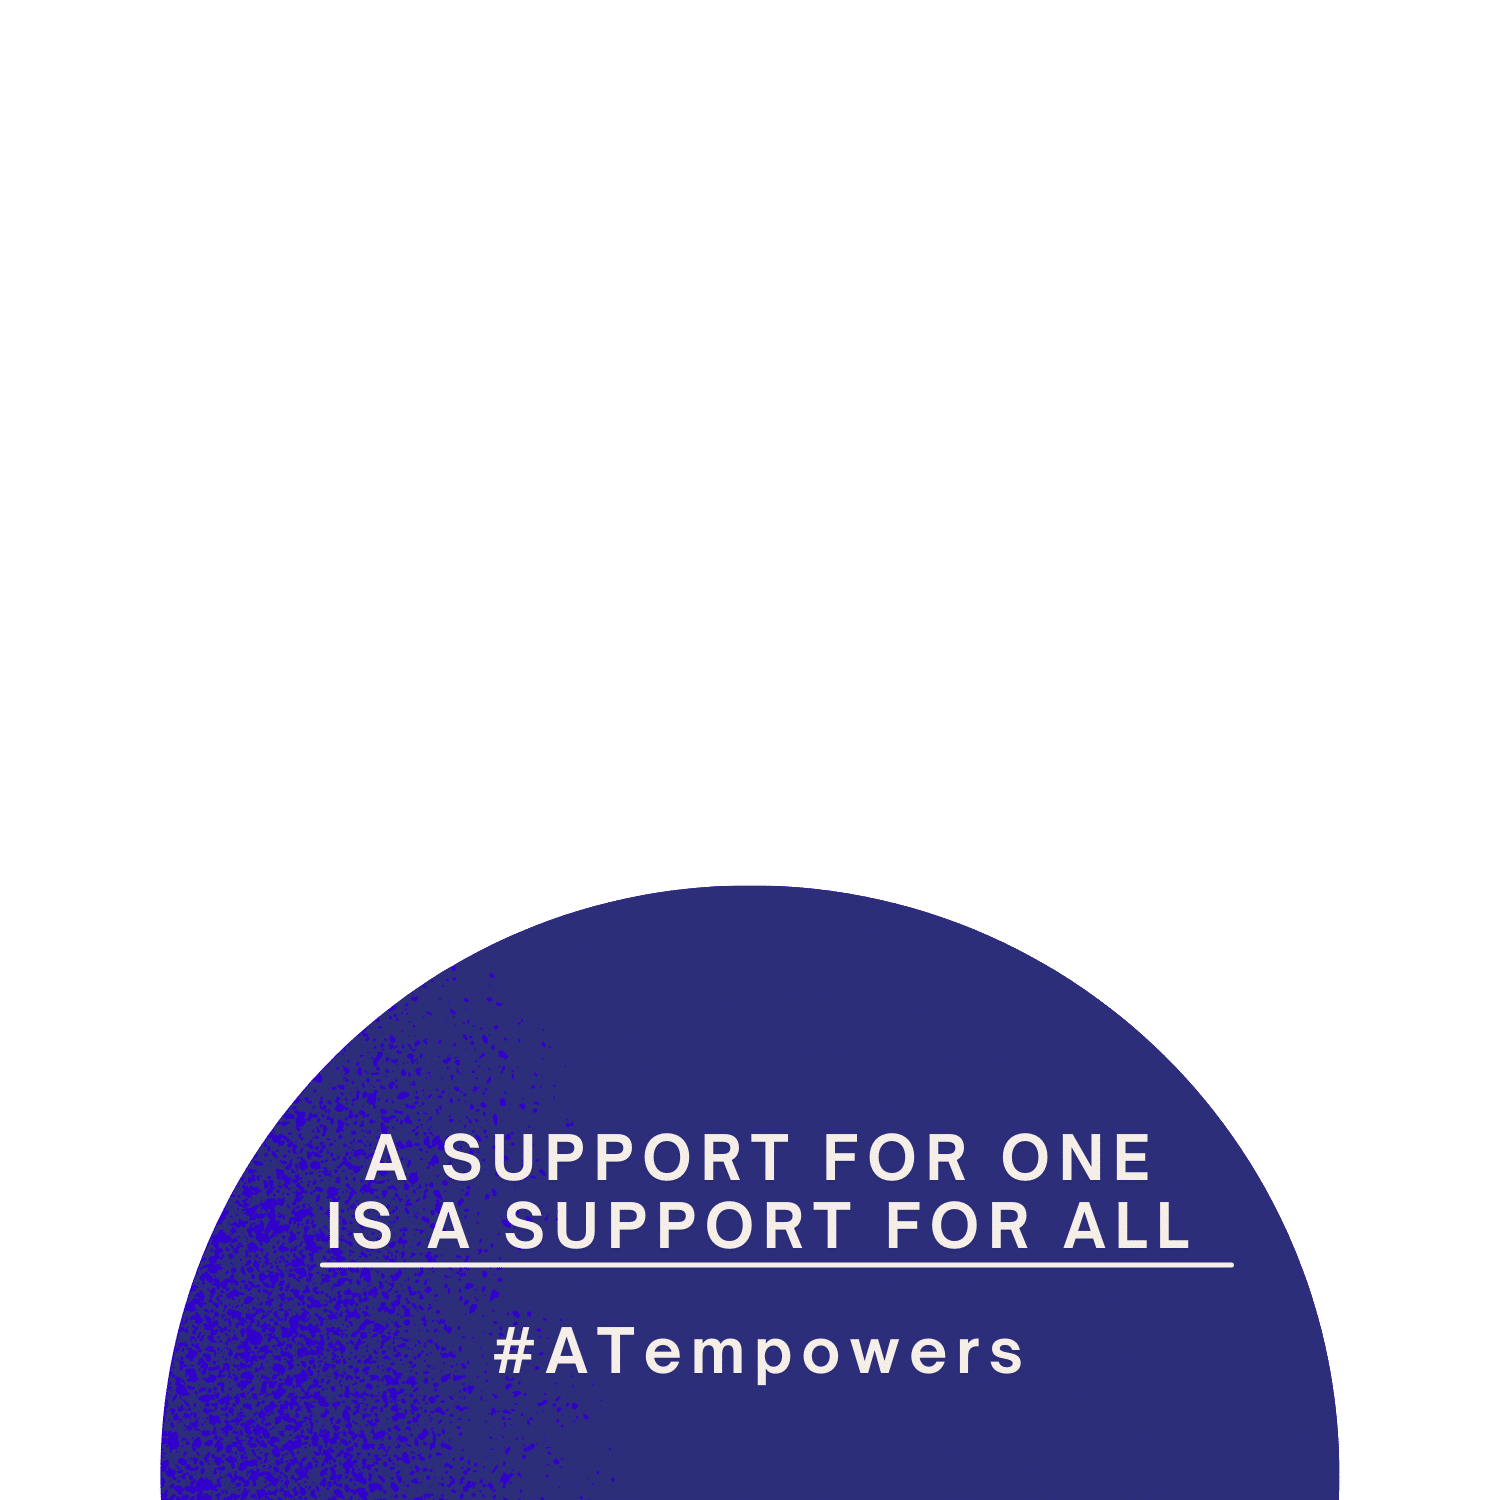 A support for one is a support for all! Social Frame